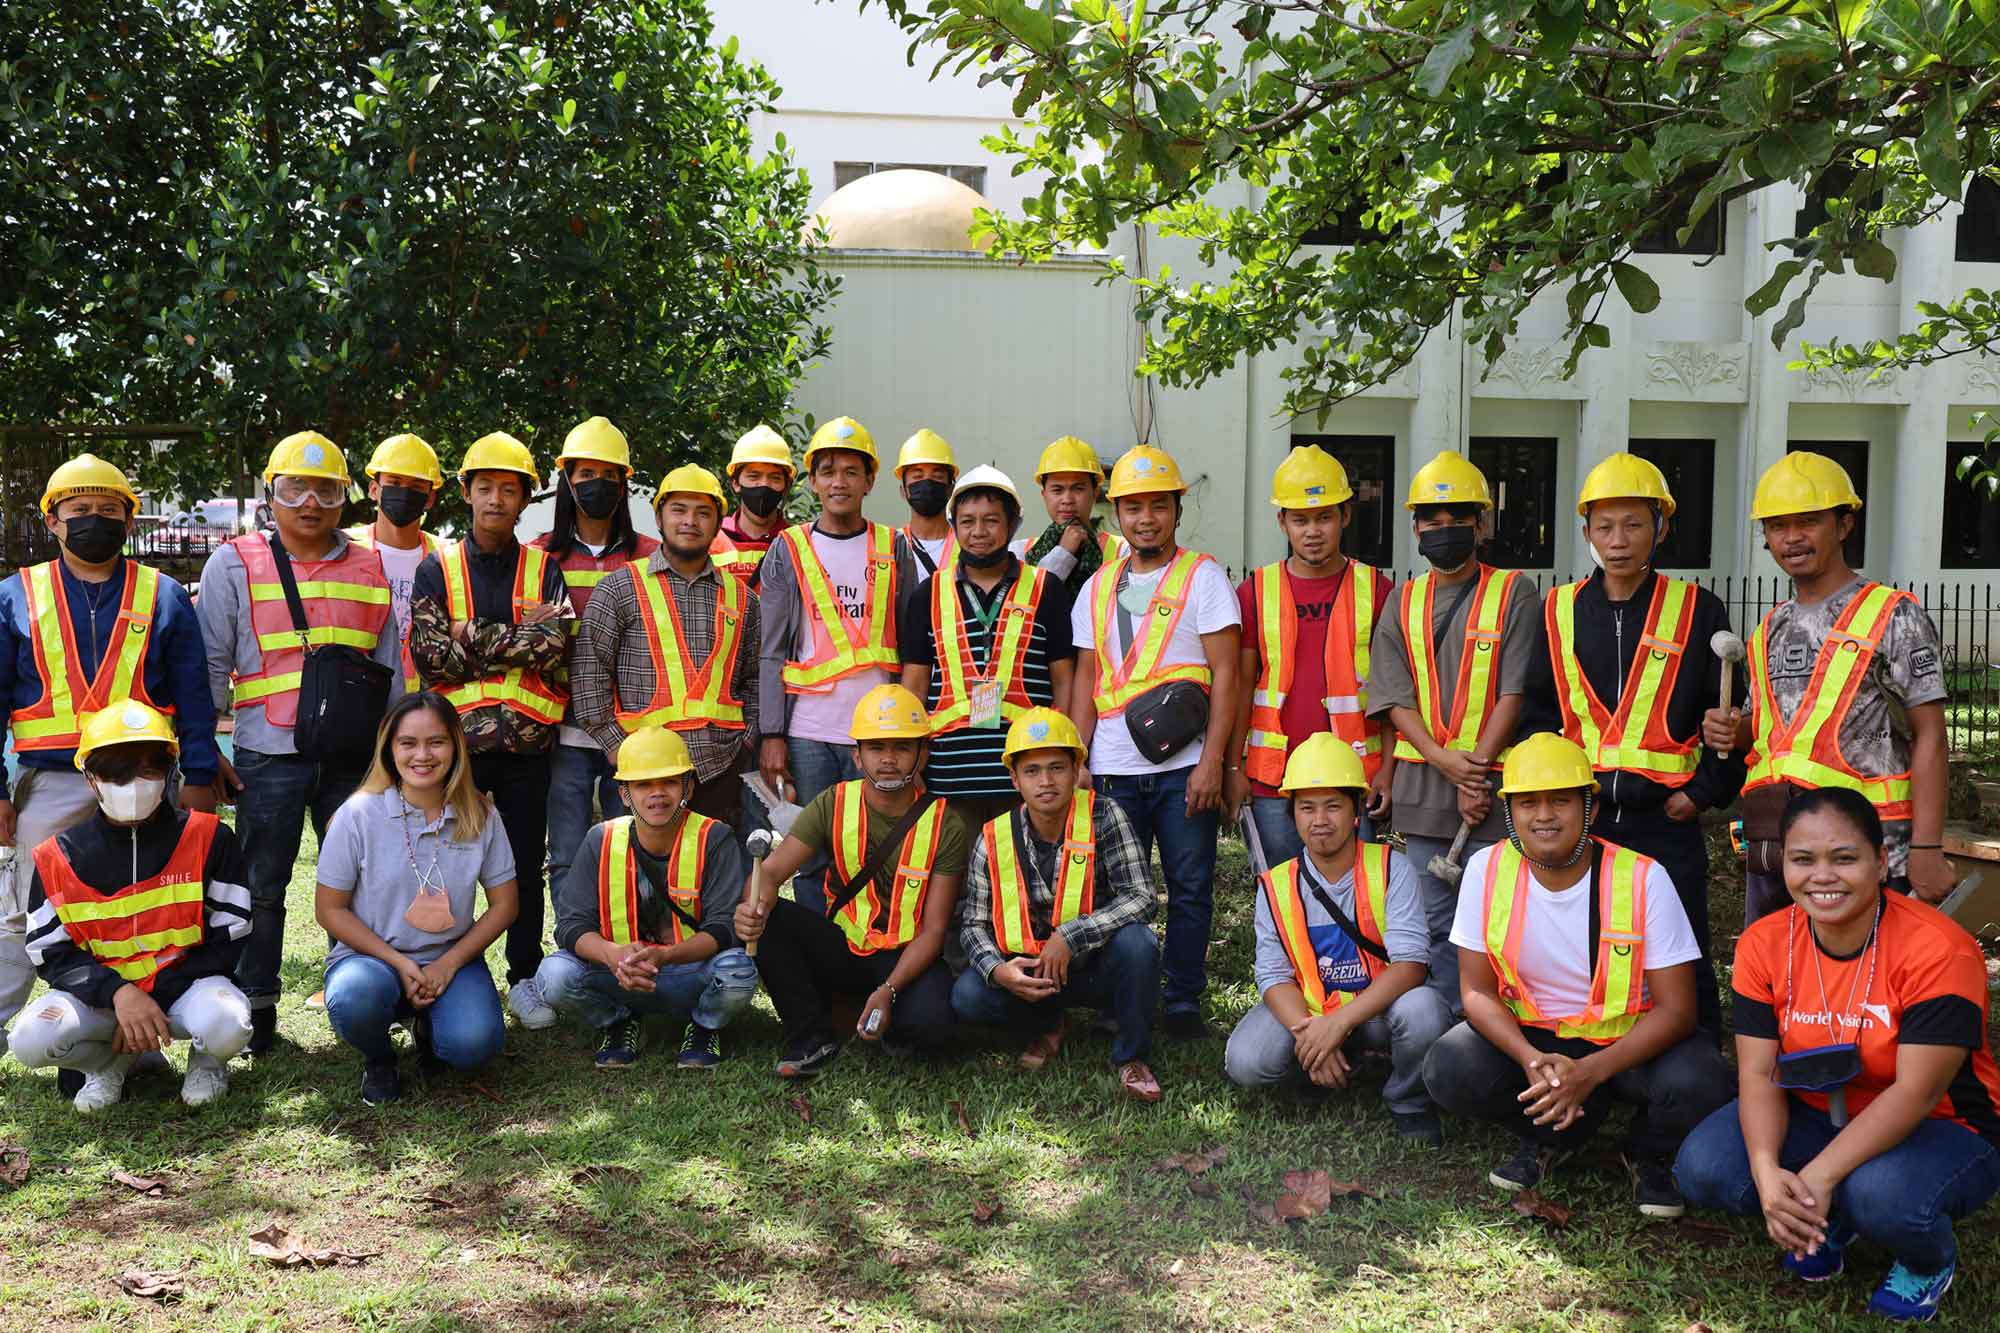 A large group of construction workers wearing hard-hats and safety vests are pictured outside.  